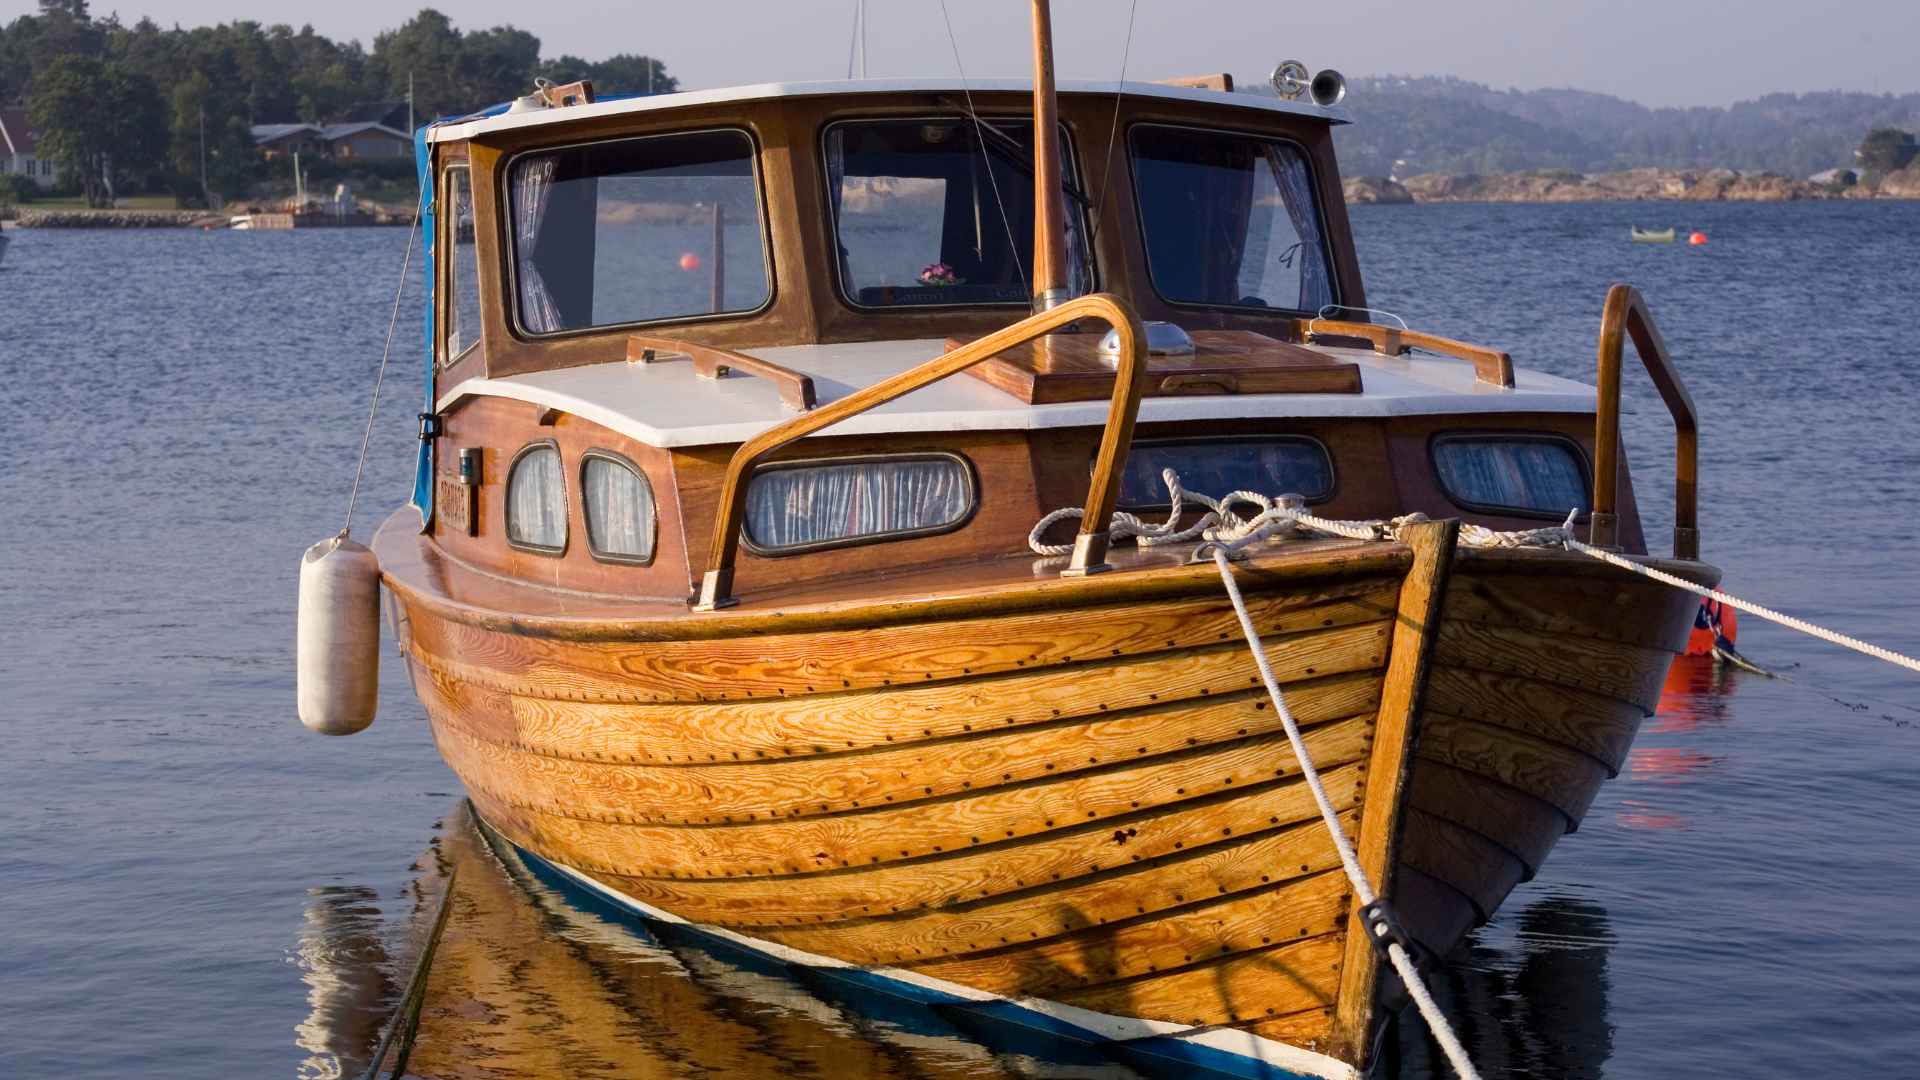 How to Build a Wooden Boat: Step by Step Guide